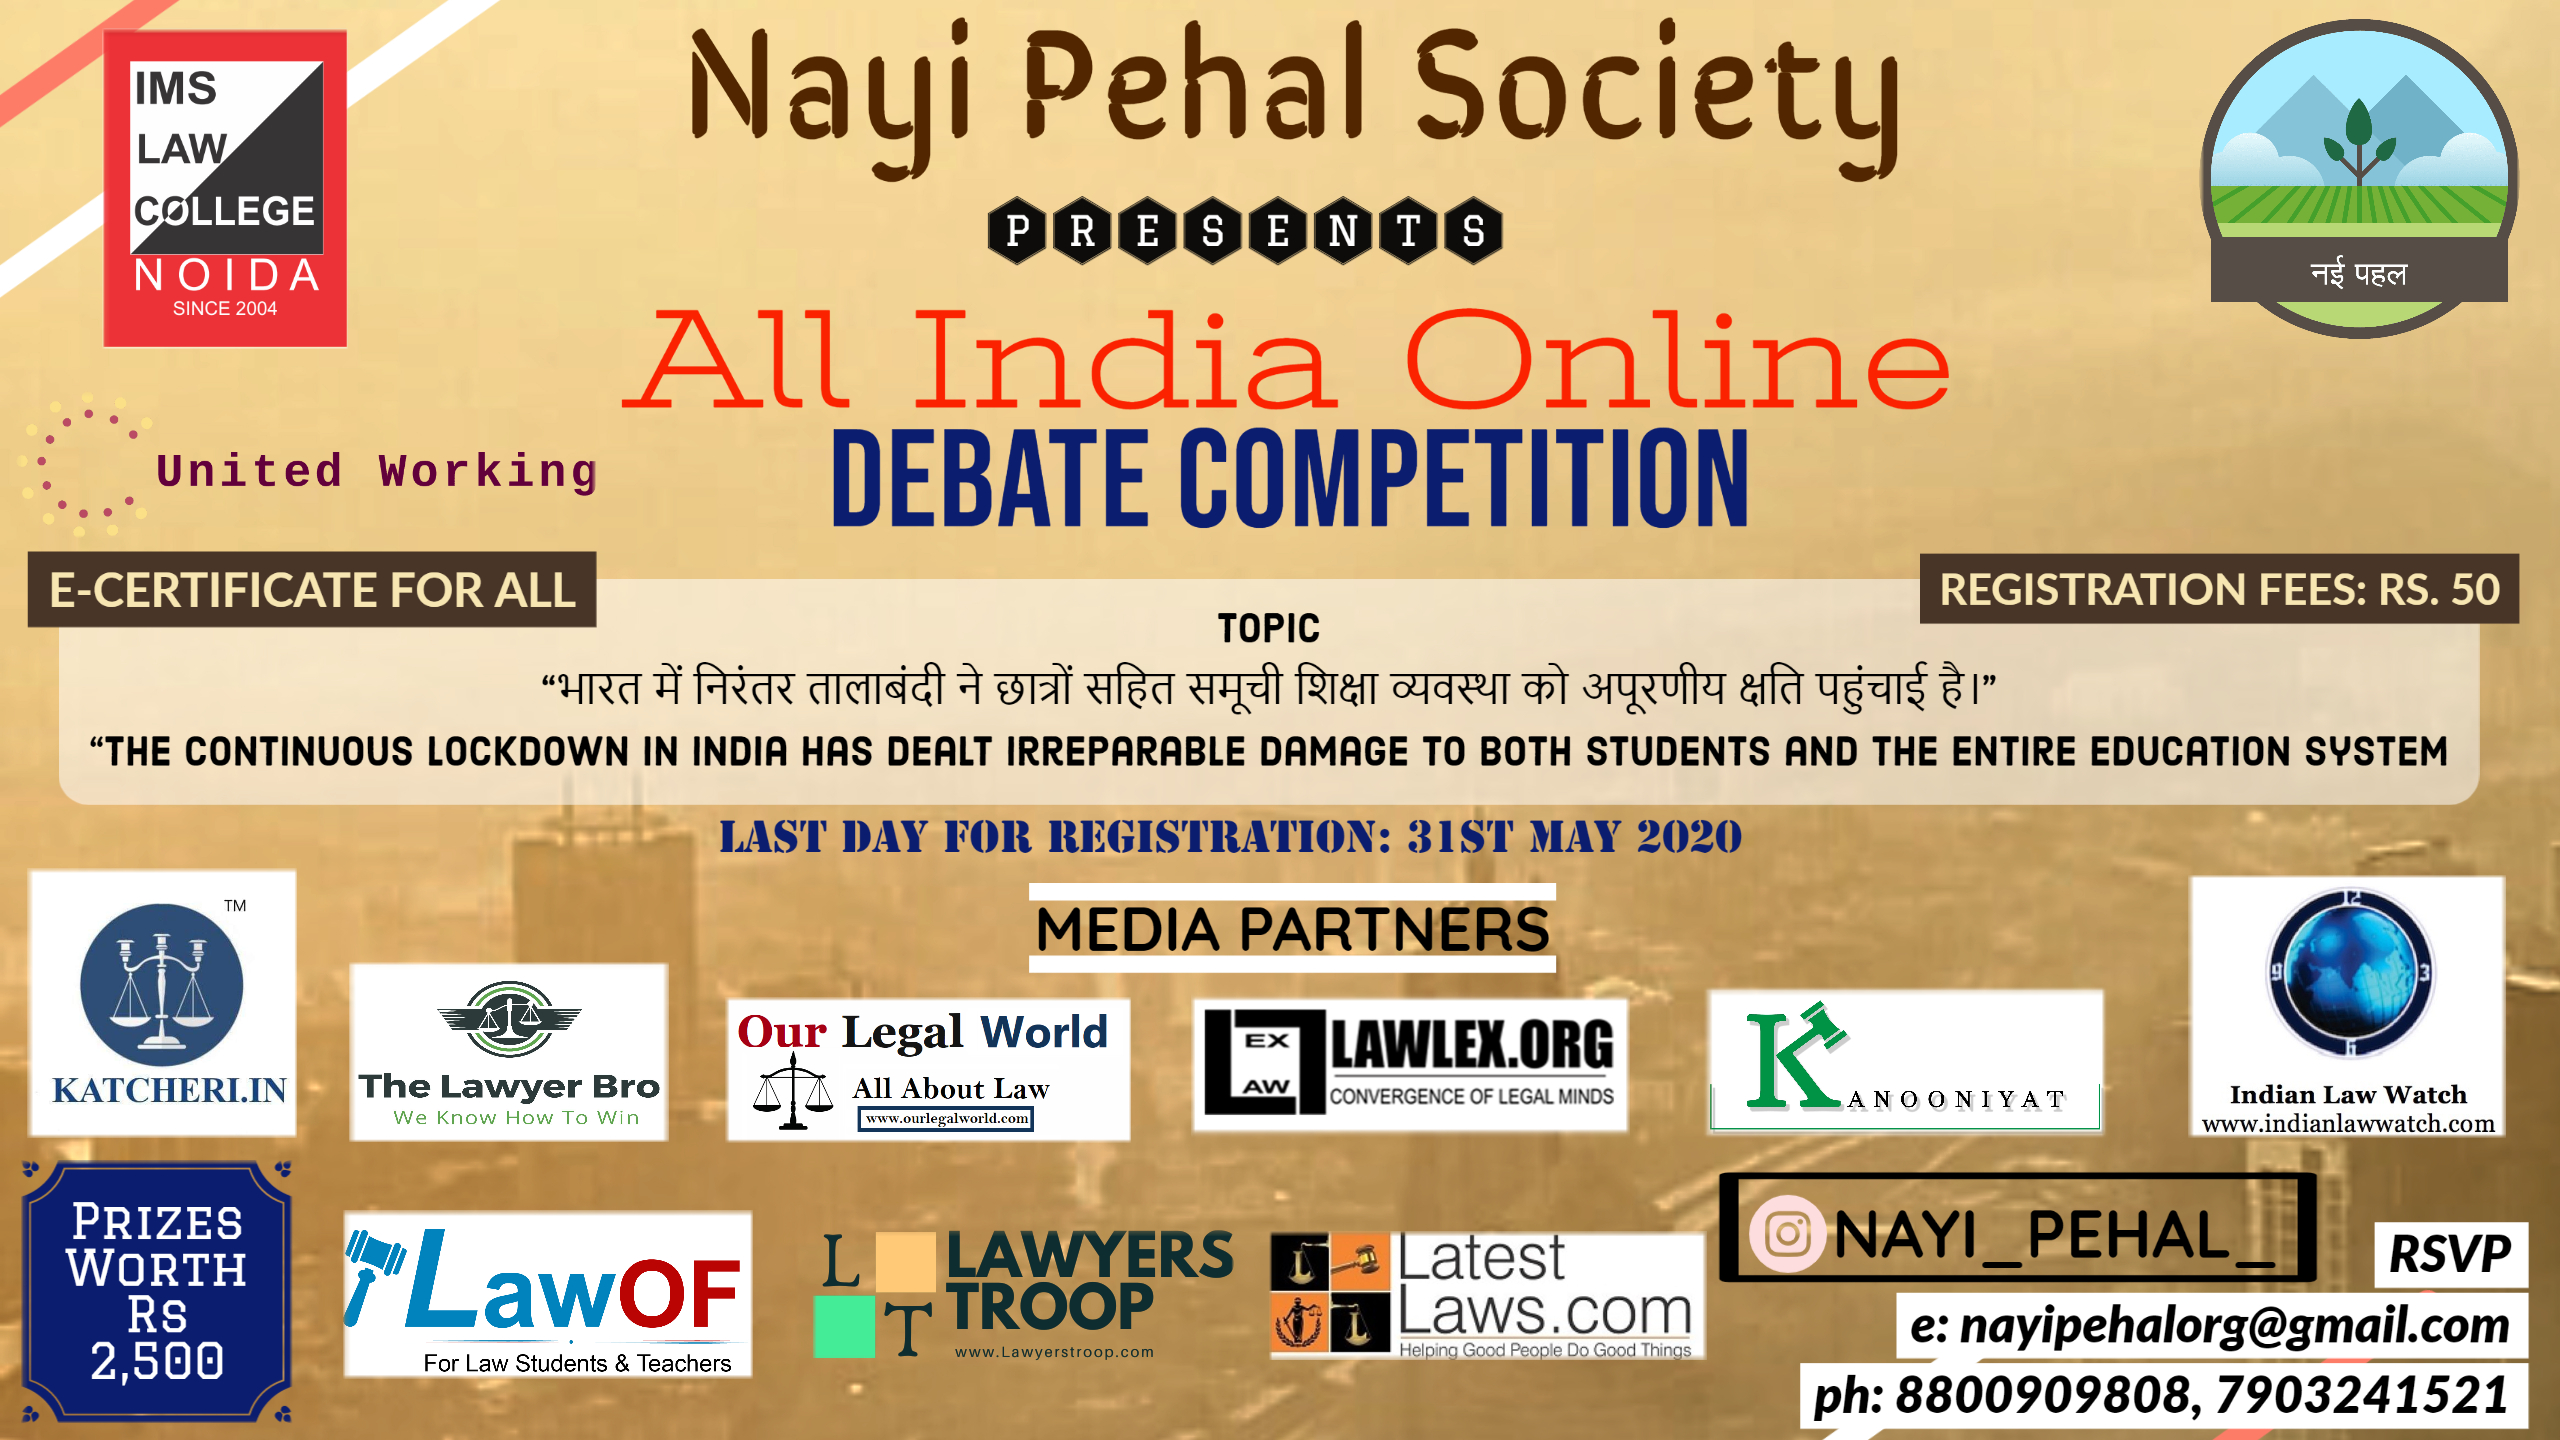 Latestlaws Com Partner Event All India Online Debate Competition On Topic Related To Covid 19 Pandemic By Nayi Pehal Society At Ims Noida Register By 31st May 2020